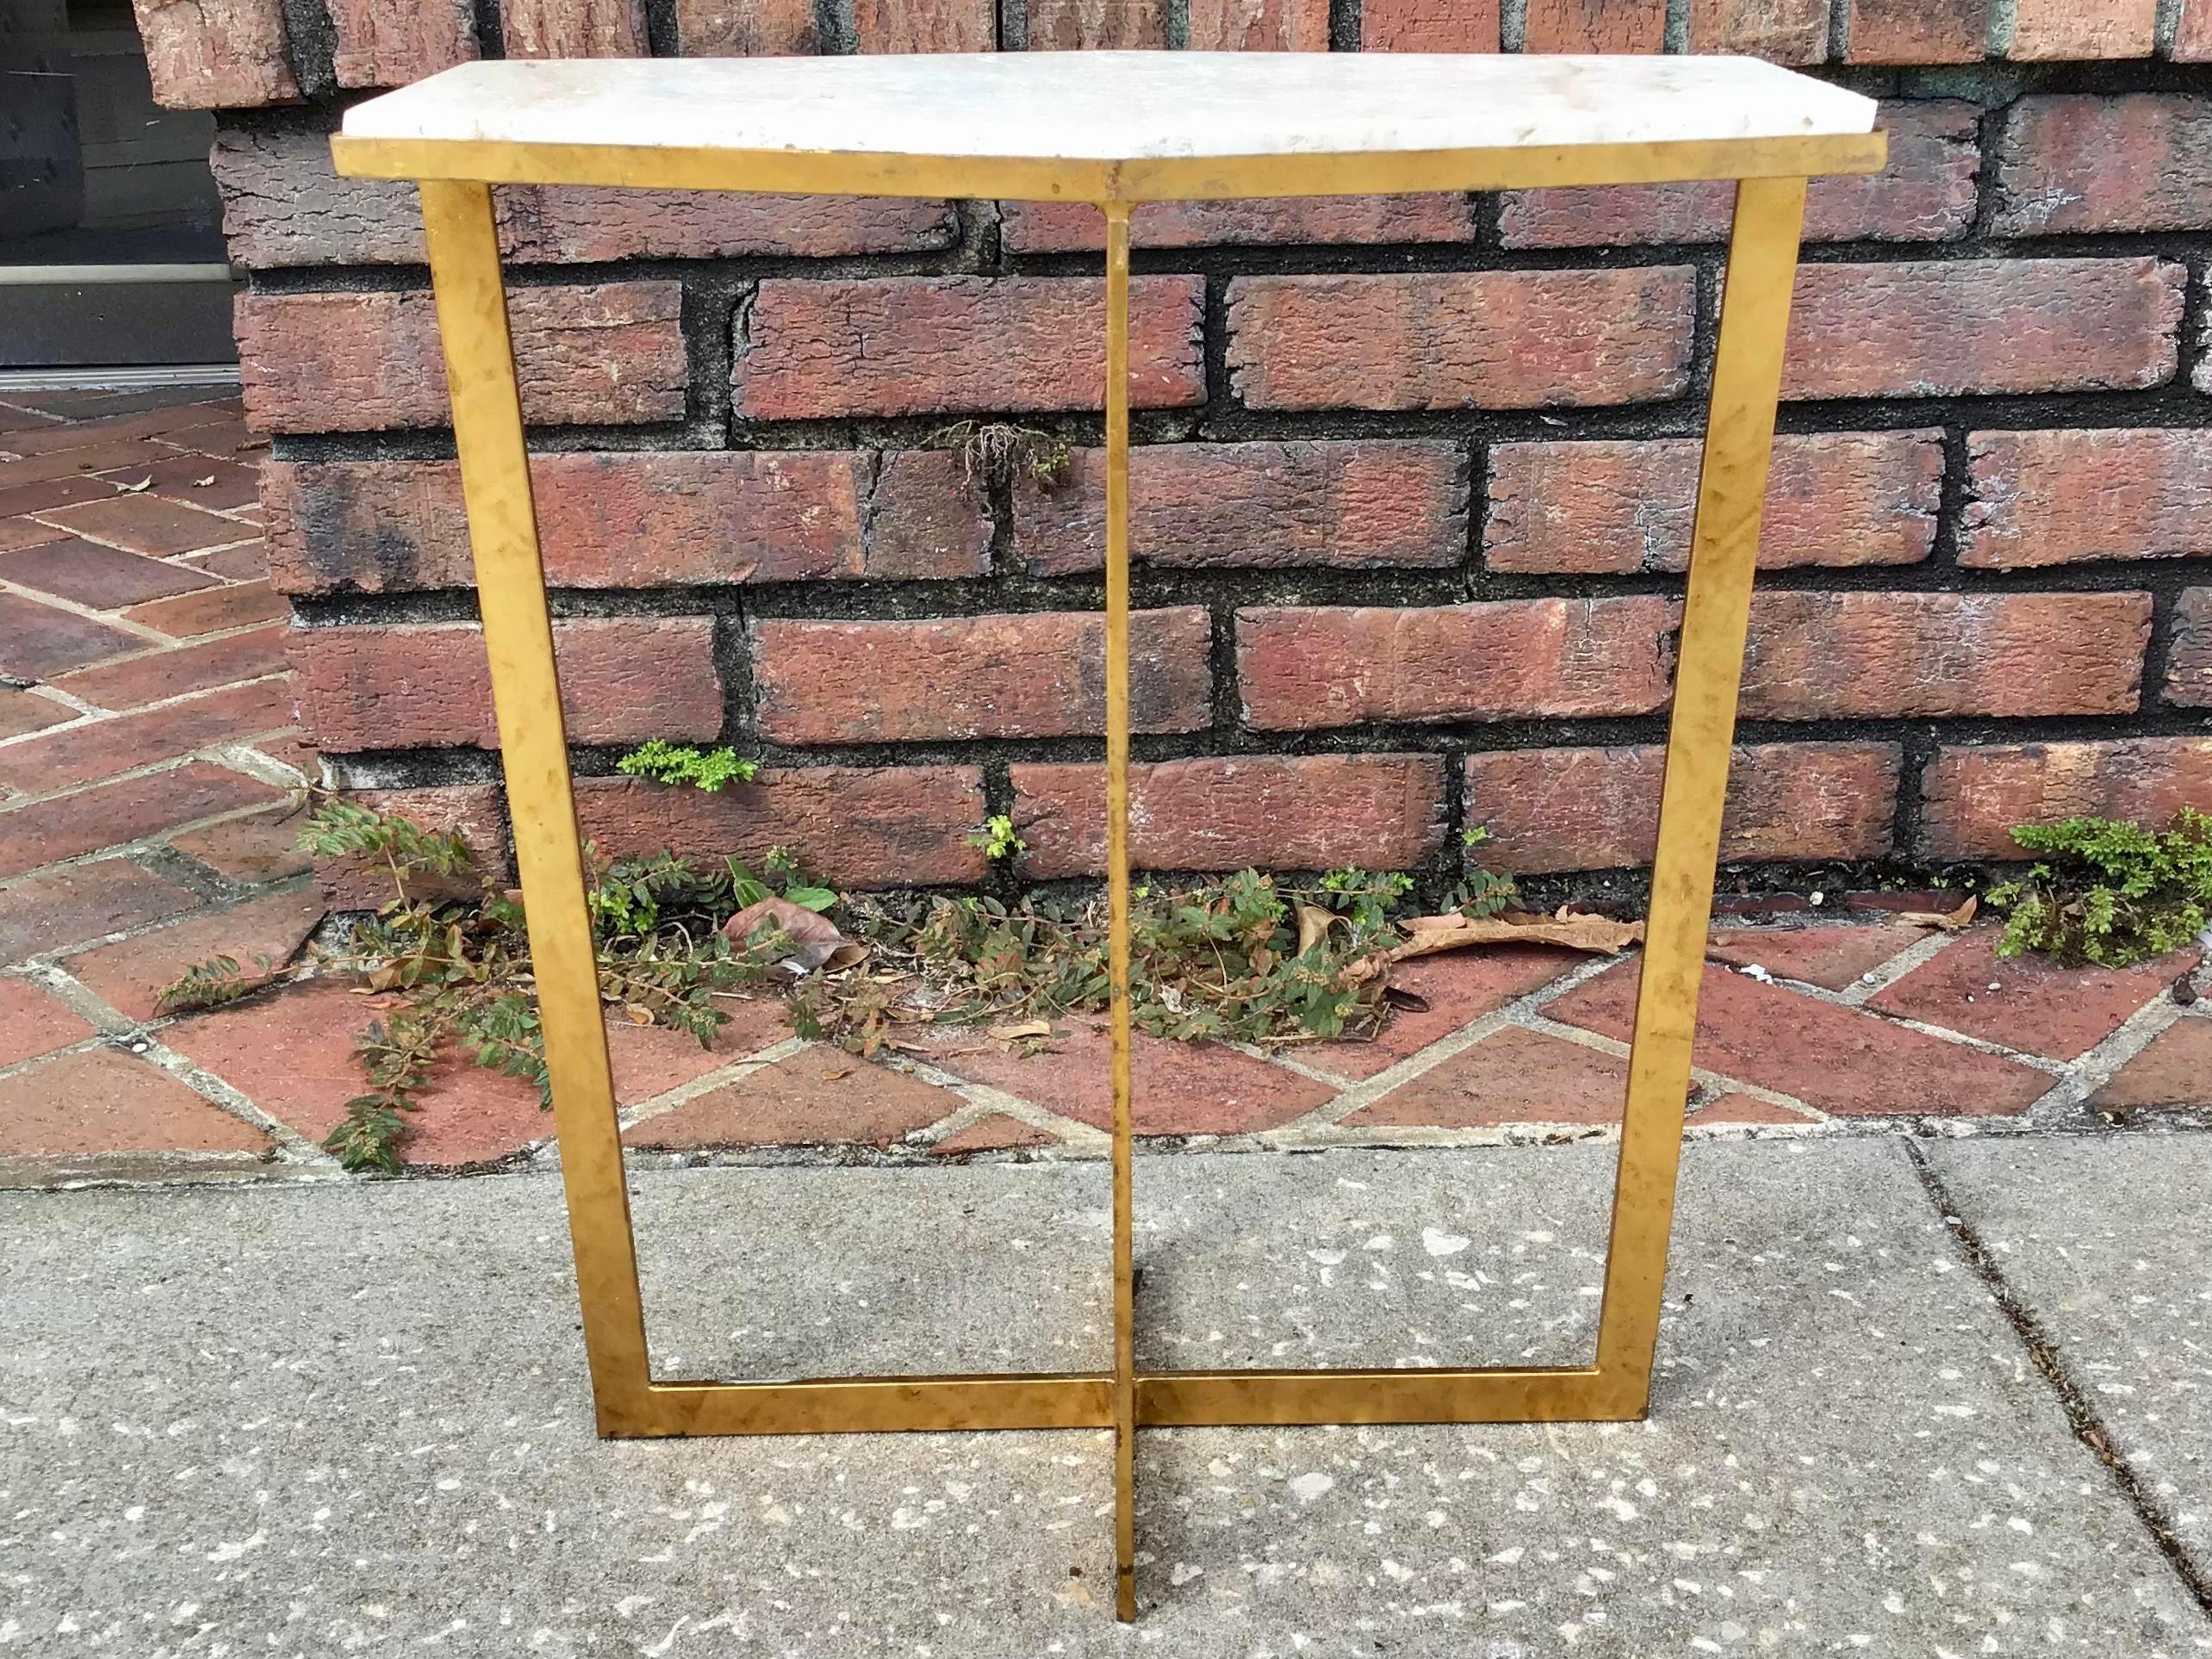 Very small hexagonal cocktail table with metal in gold base and travertine marble top for one or two drinks. Great addition to your glam decor bar and house.